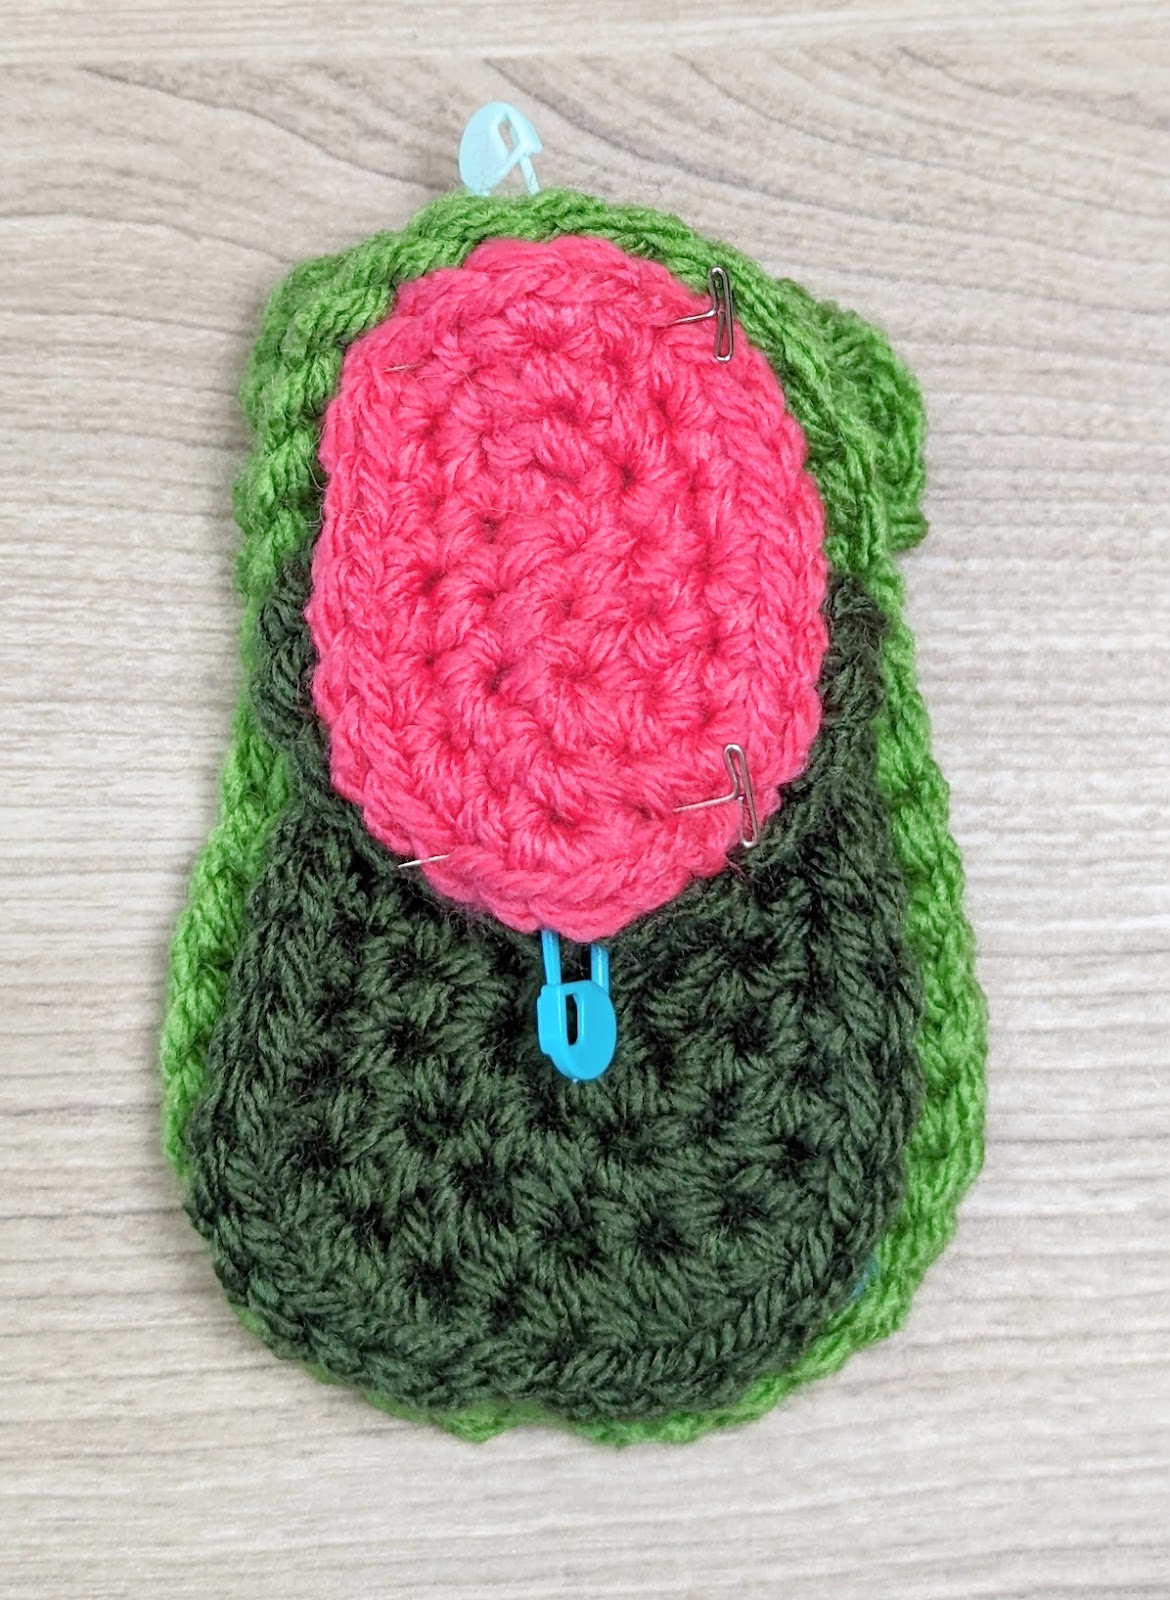 A crochet avocado made with green and dark green yarn for the body and pink yarn for the seed, secured with blue and silver stitch markers, lies on a light wooden surface.